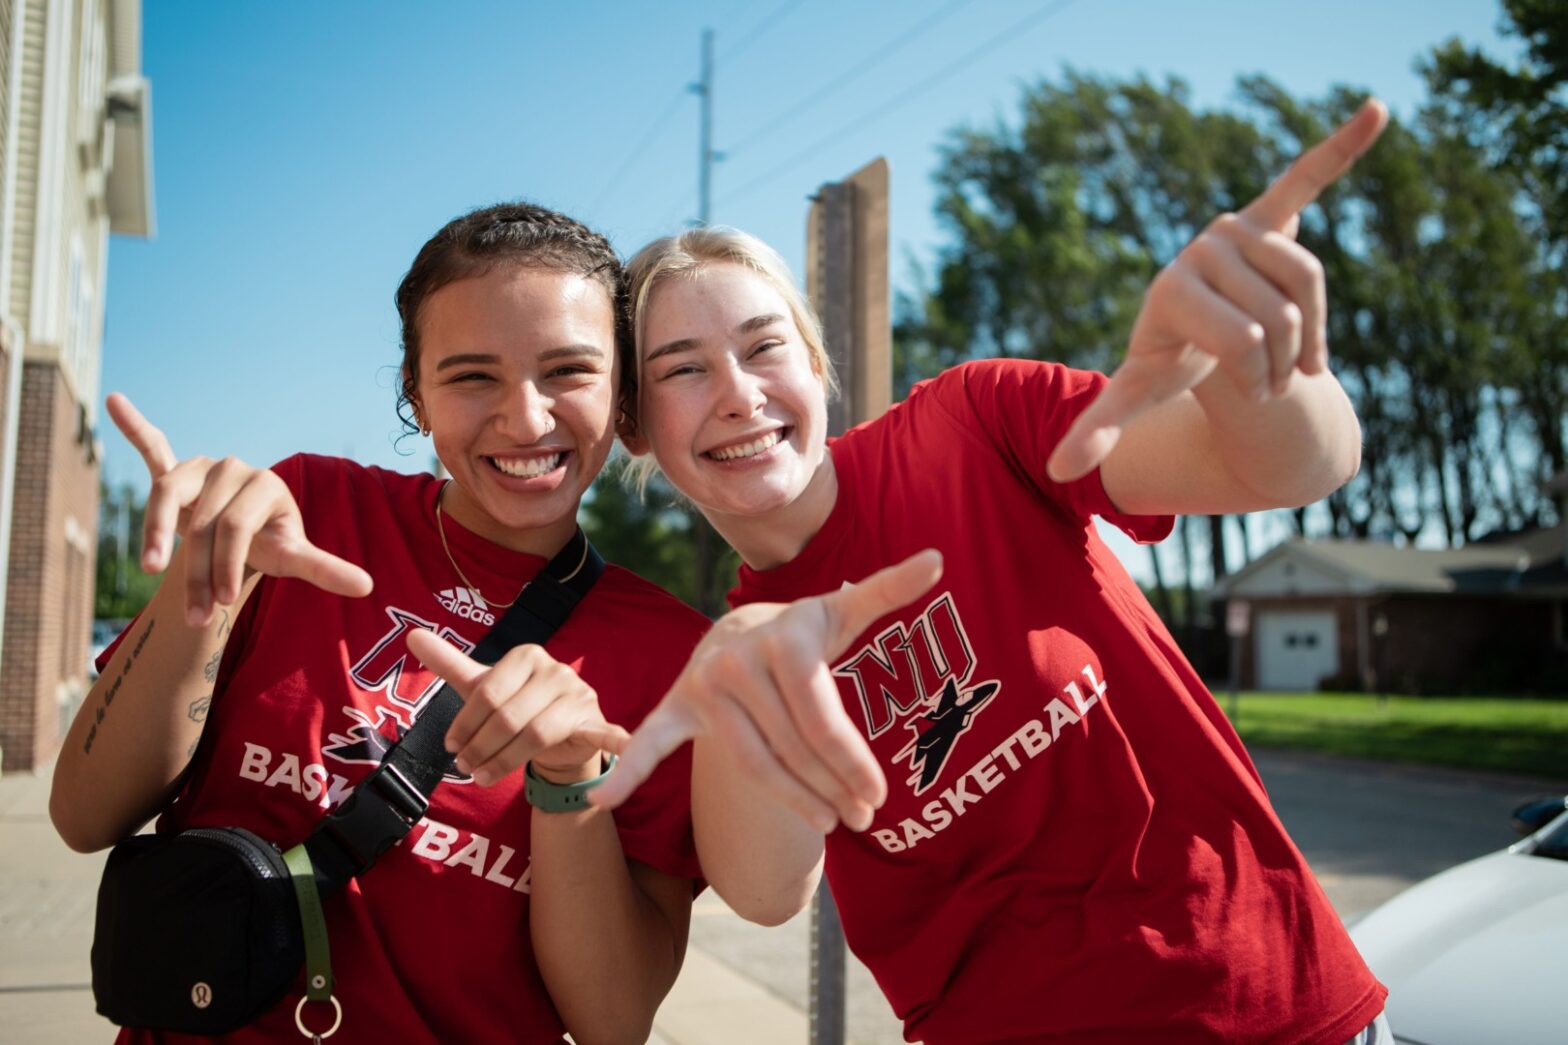 Amaya Perez and Valerya Lioukina pose for a photo on move in day.